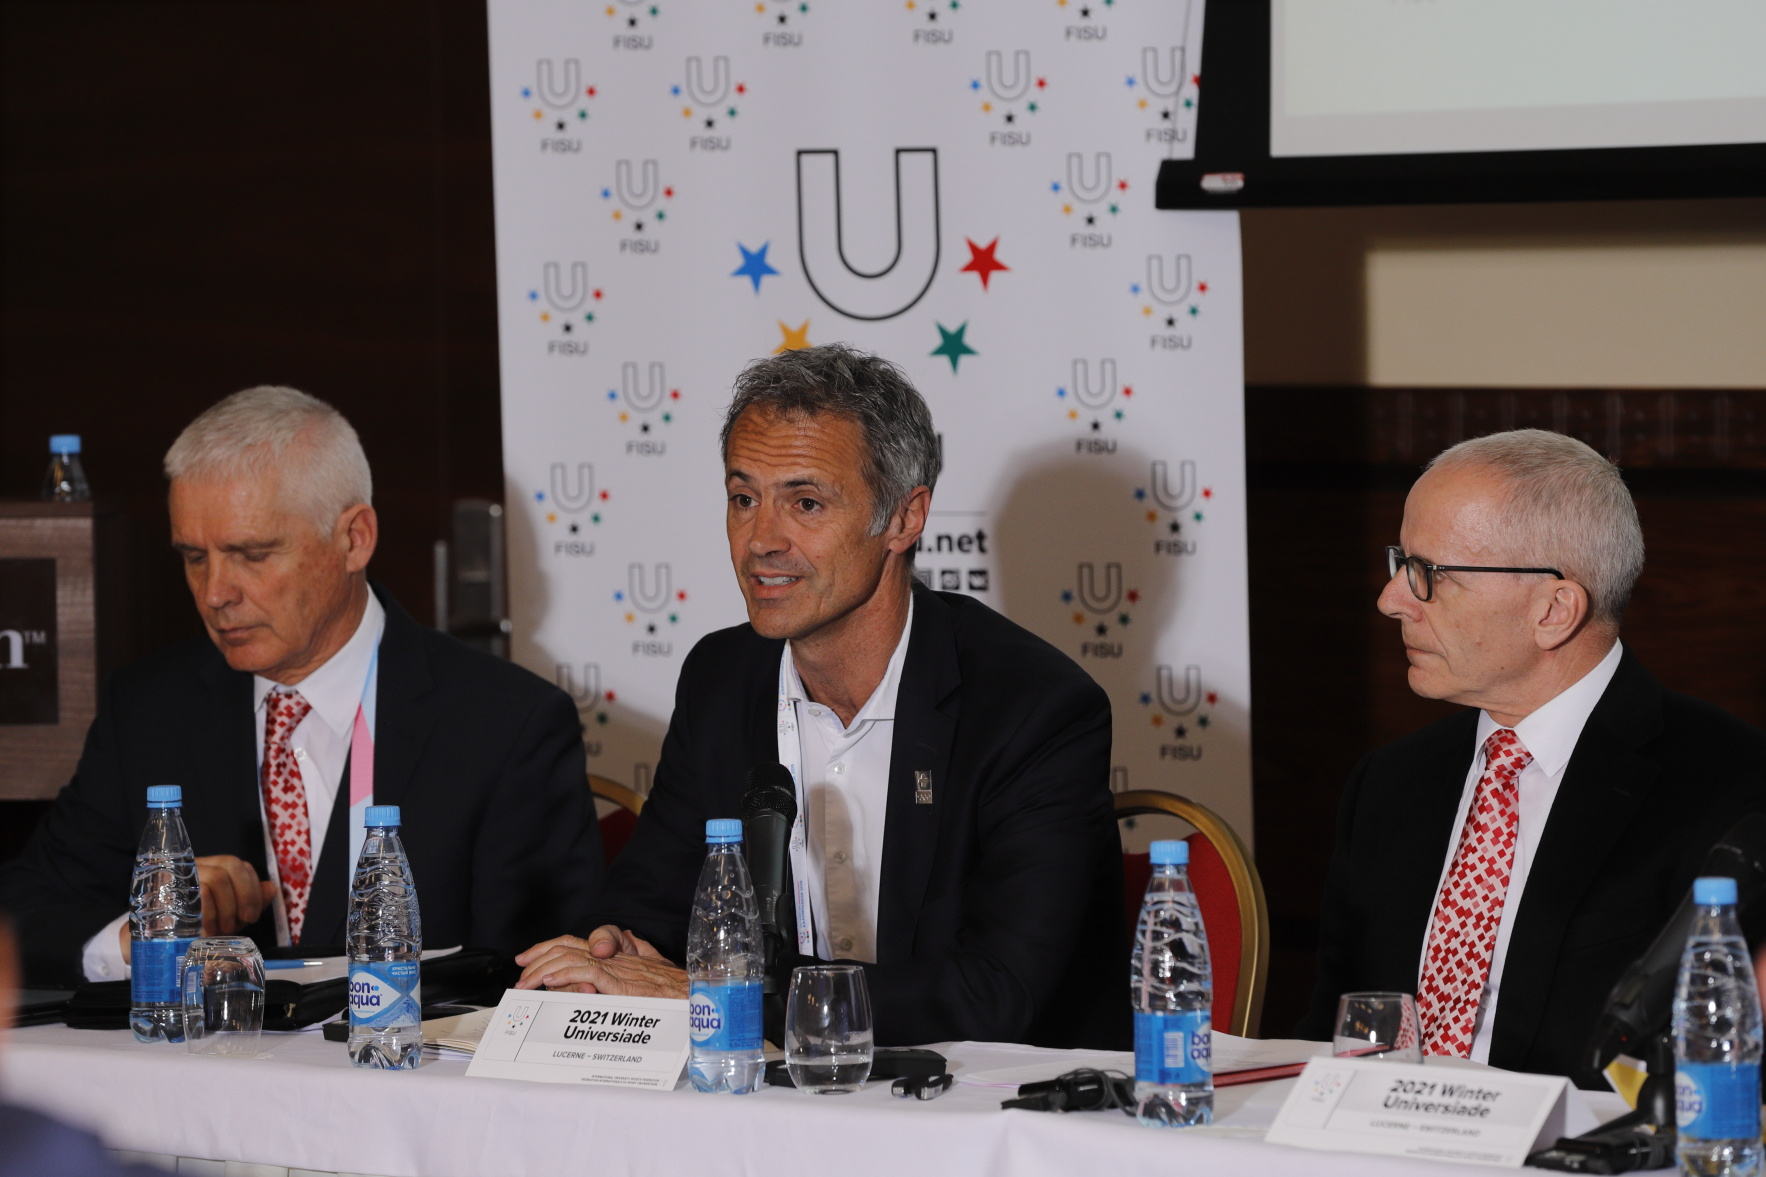 Lucerne 2021 have presented a progress report to FISU and are participating in an observer programme in Krasnoyarsk ©FISU